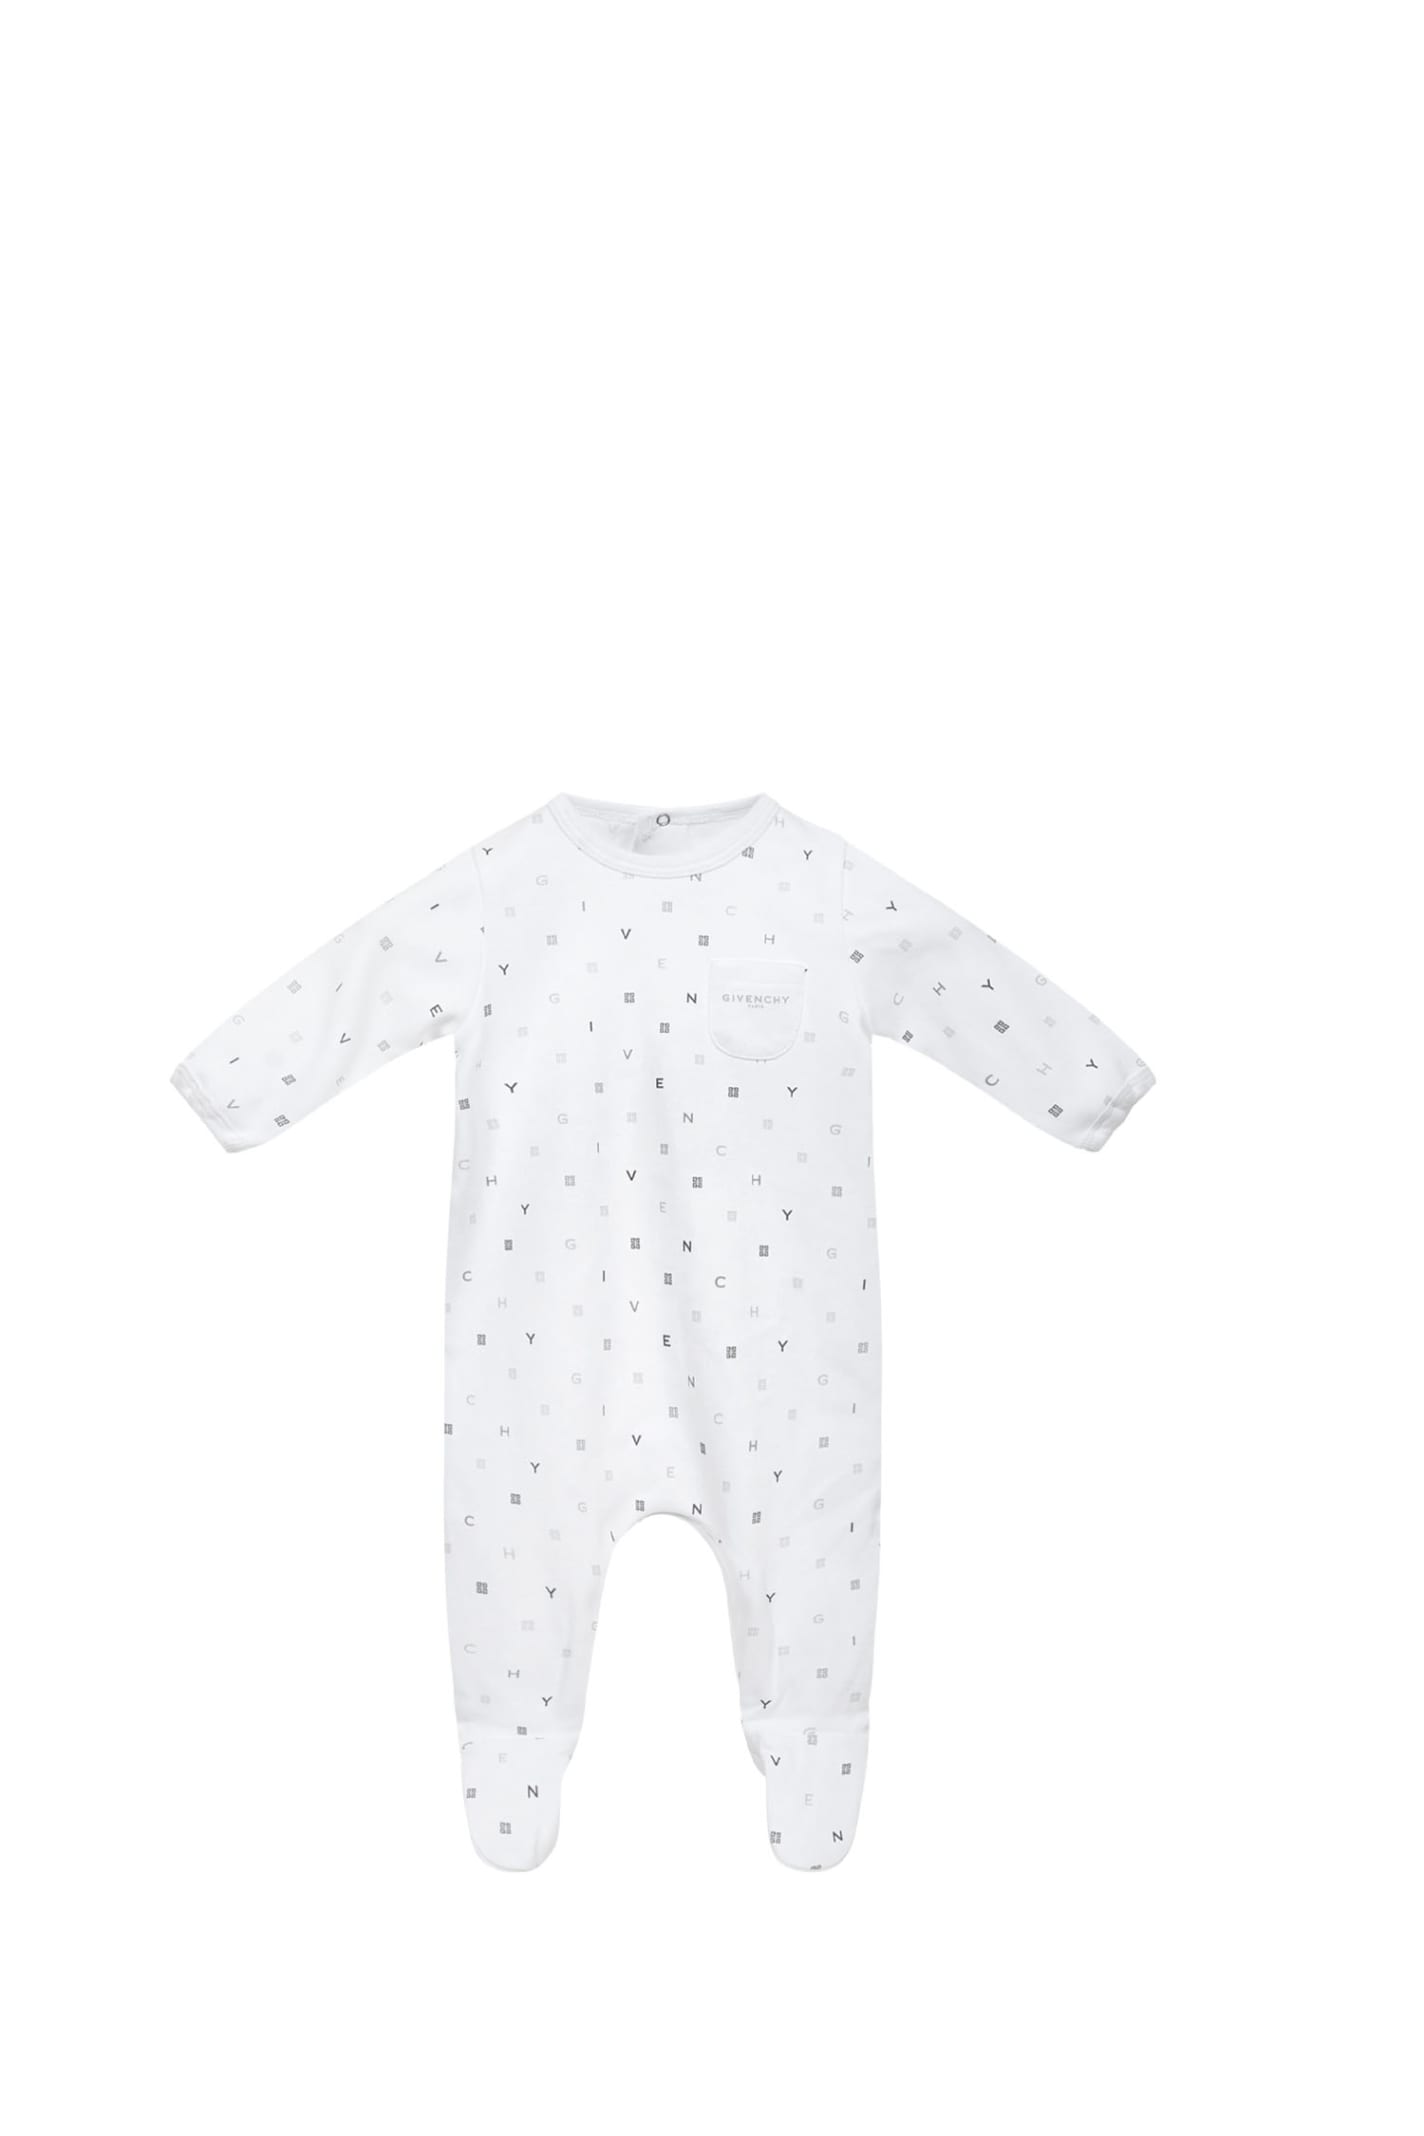 Givenchy Babies' Cotton Jersey Romper In White